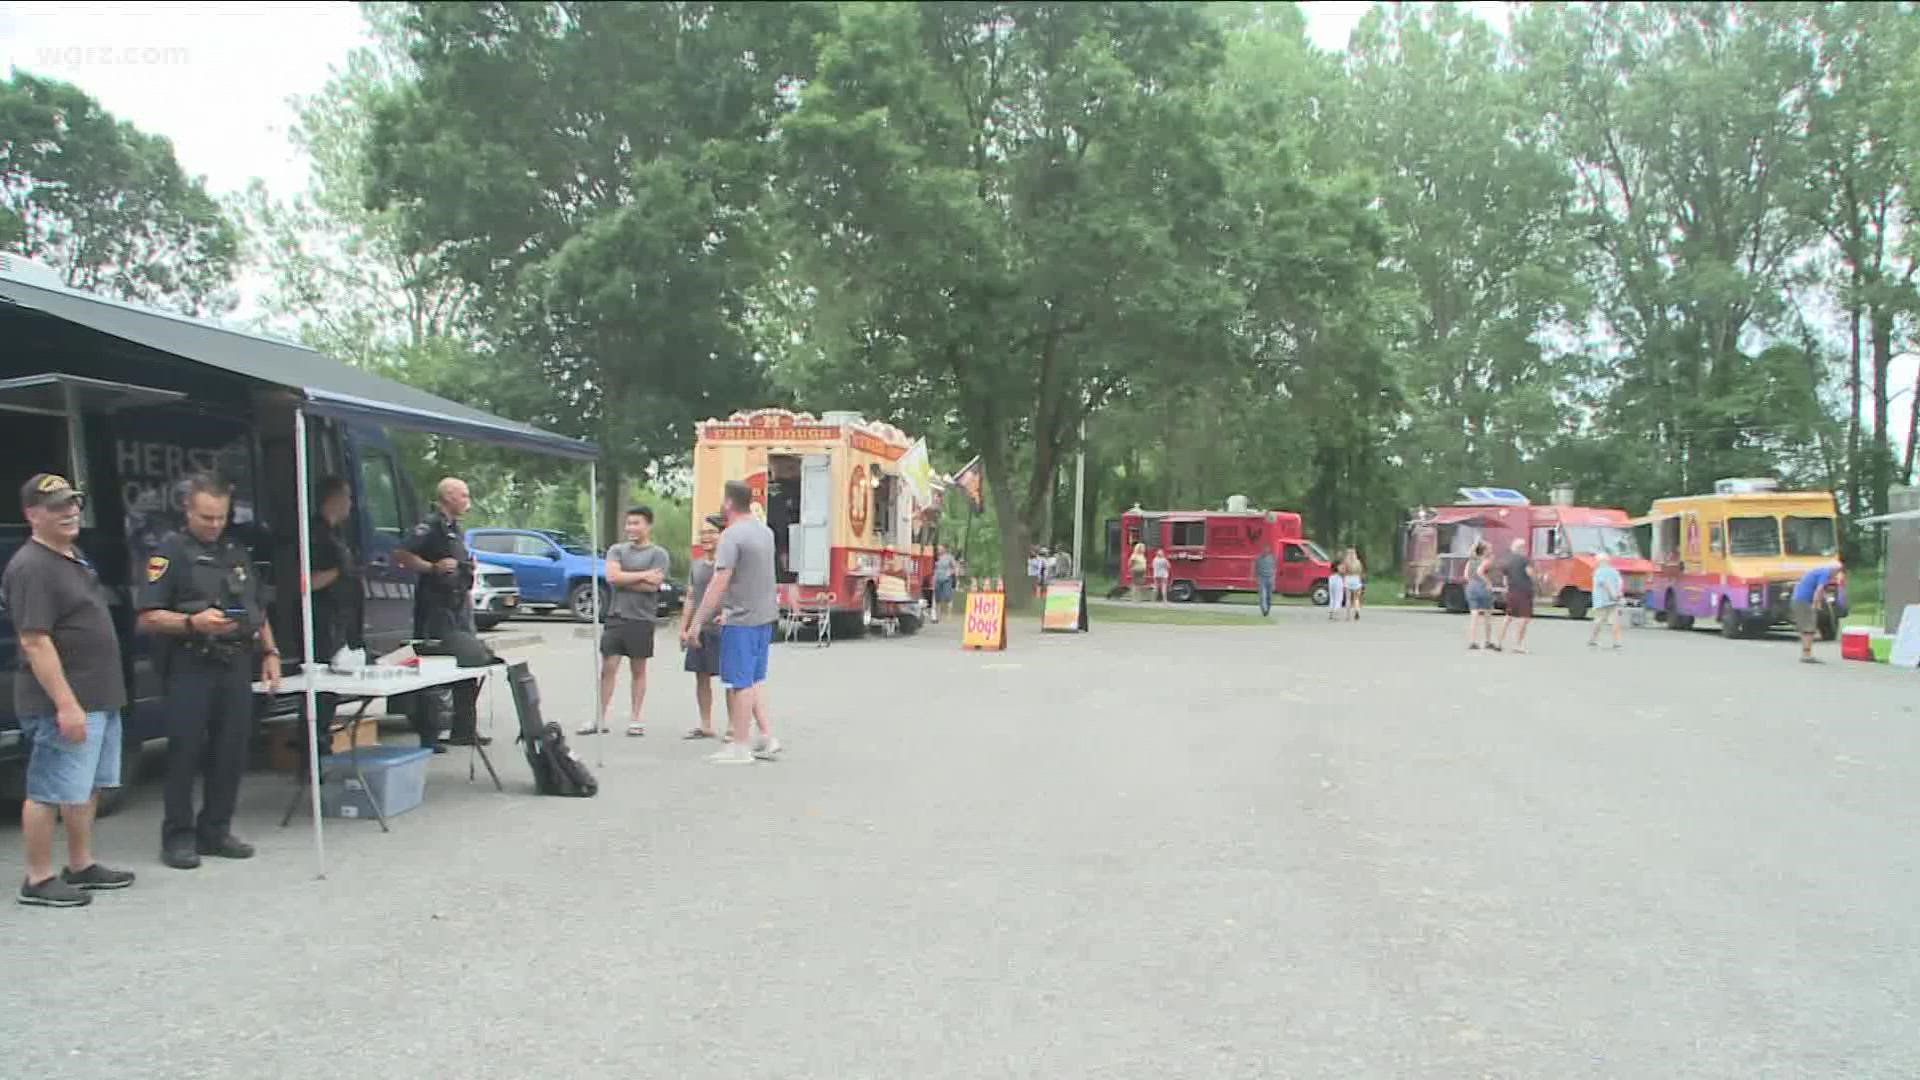 today the summer food truck season is wrapping up in Amherst, they'll end the season at the Senior Center on Audubon Parkway.